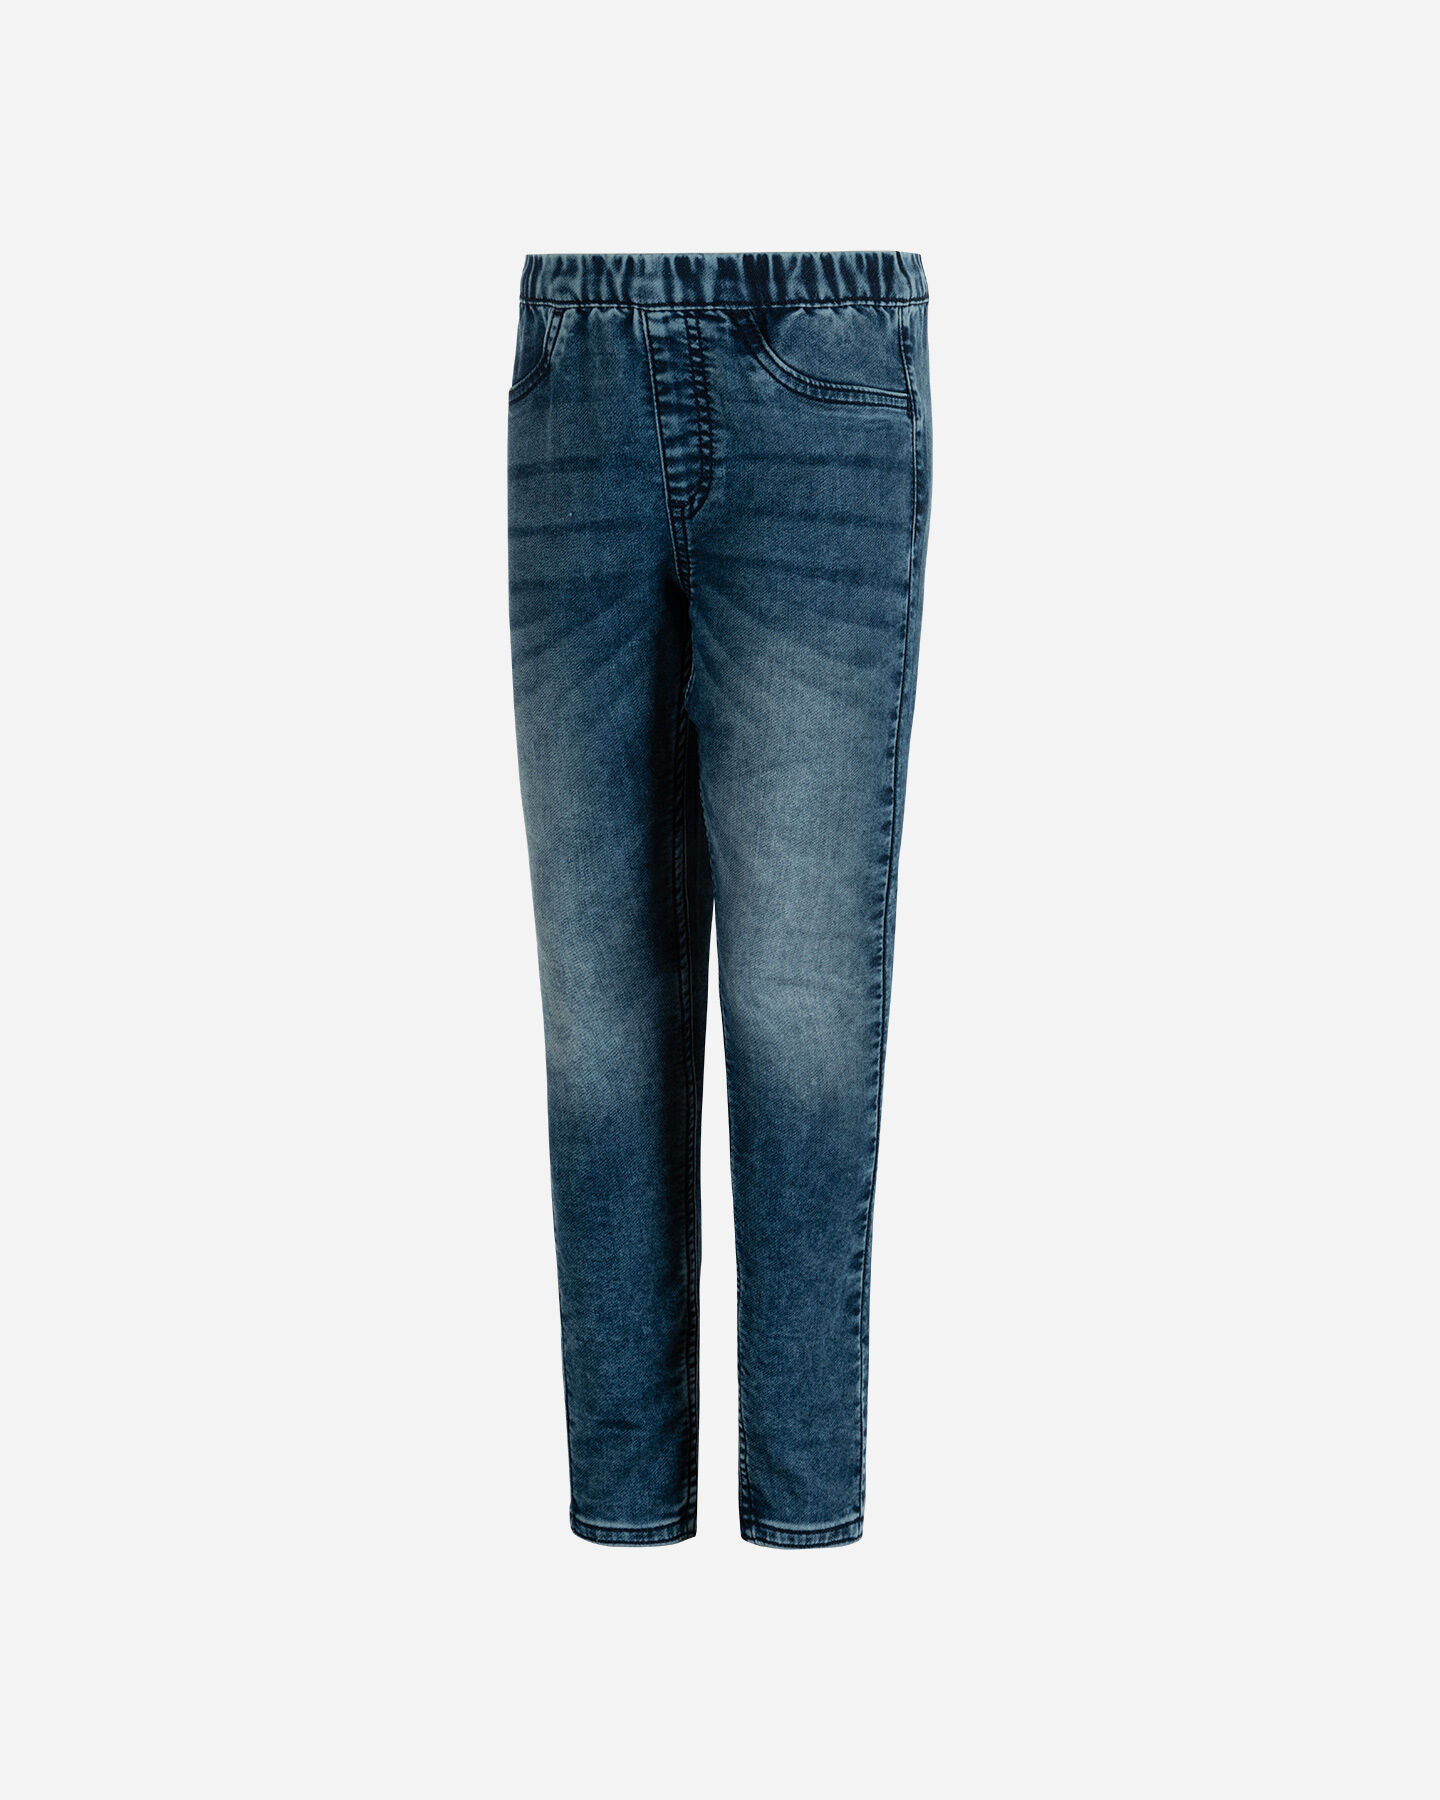  Jeans ADMIRAL LIFESTYLE JR S4106387|DDBLUE|10A scatto 0